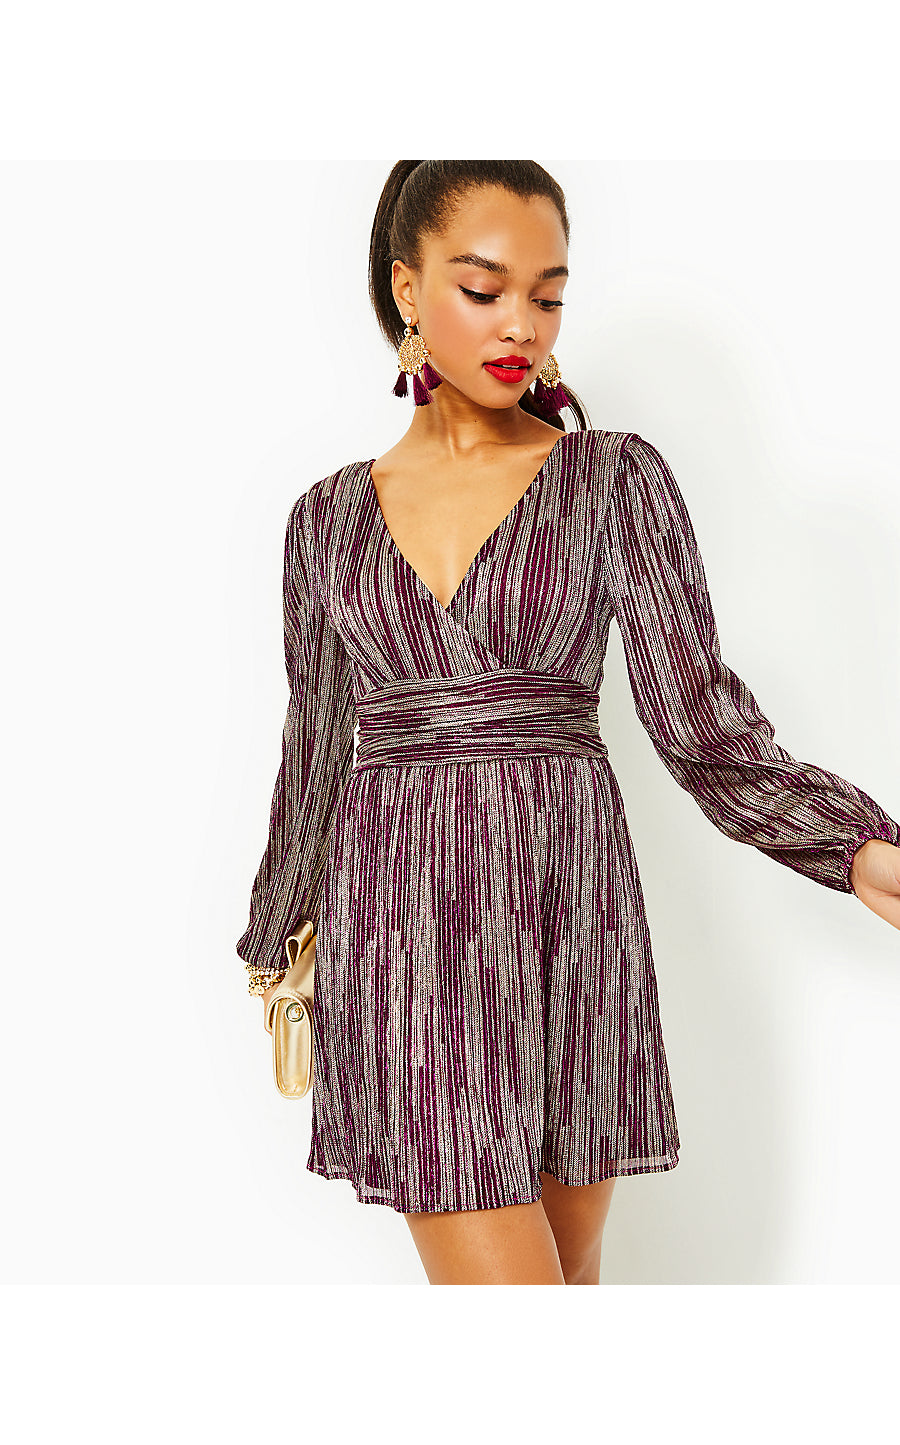 RIZA LONG-SLEEVED ROMPER, MULBERRY X GOLD METALLIC ROPE STRIPE CRINKLE KNIT